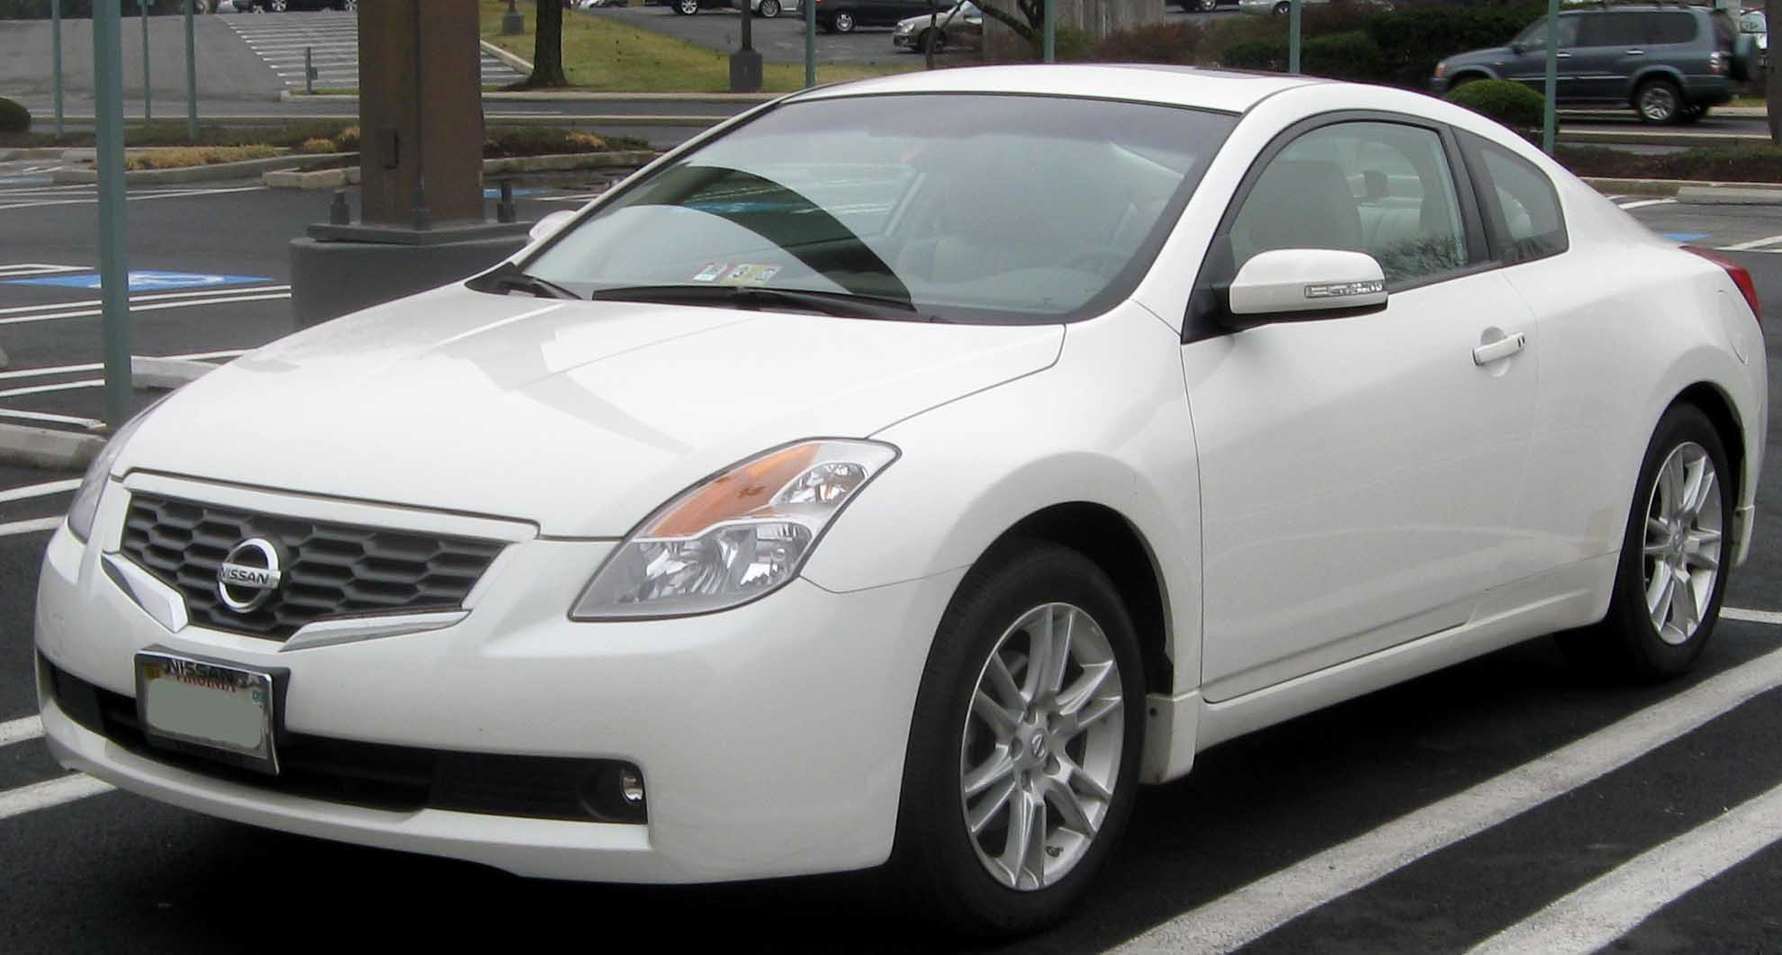 Nissan Altima Coupe #7963977